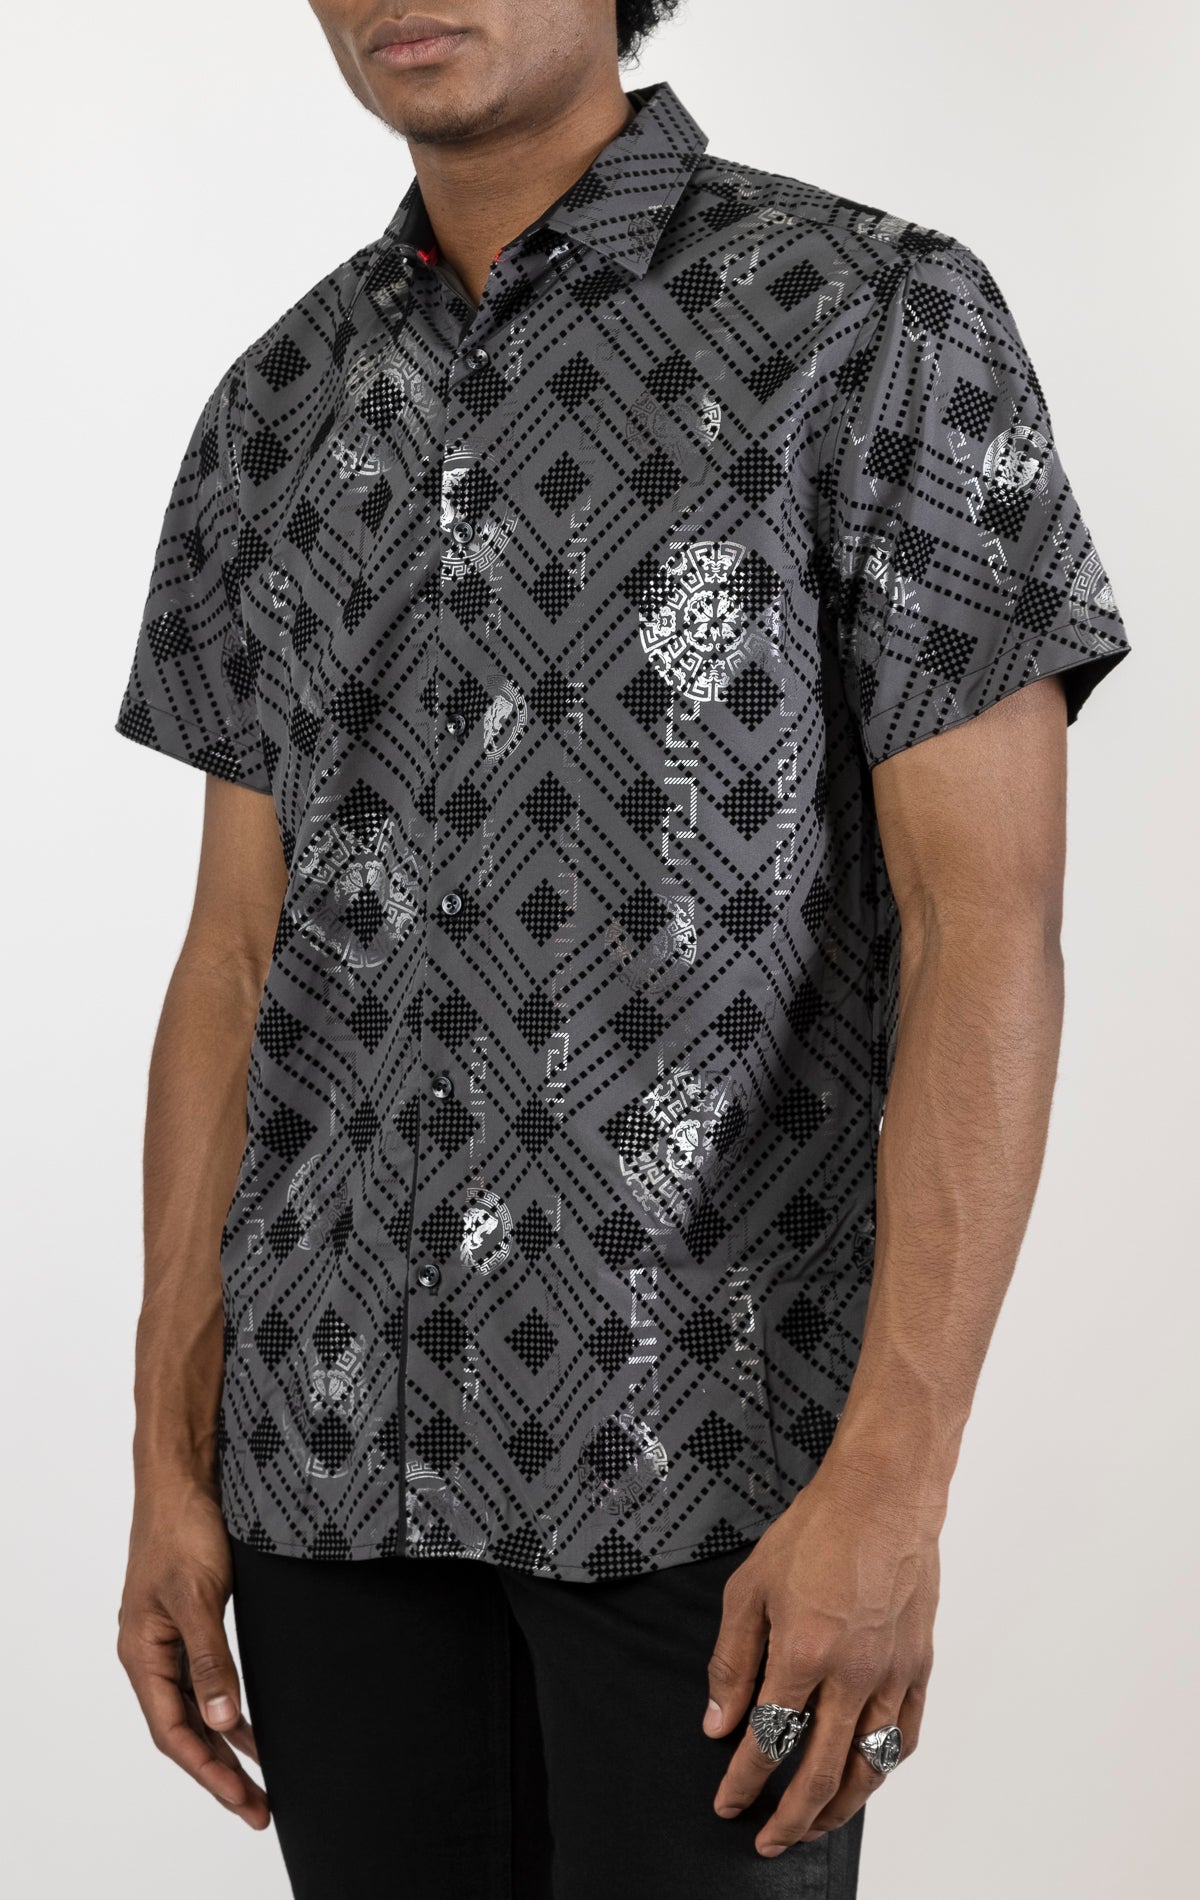 Men's modal blend button-down shirt in black. The shirt is made from a 95% modal and 5% spandex blend and features a modern cut, fade-resistant color, and a classic button-down collar.